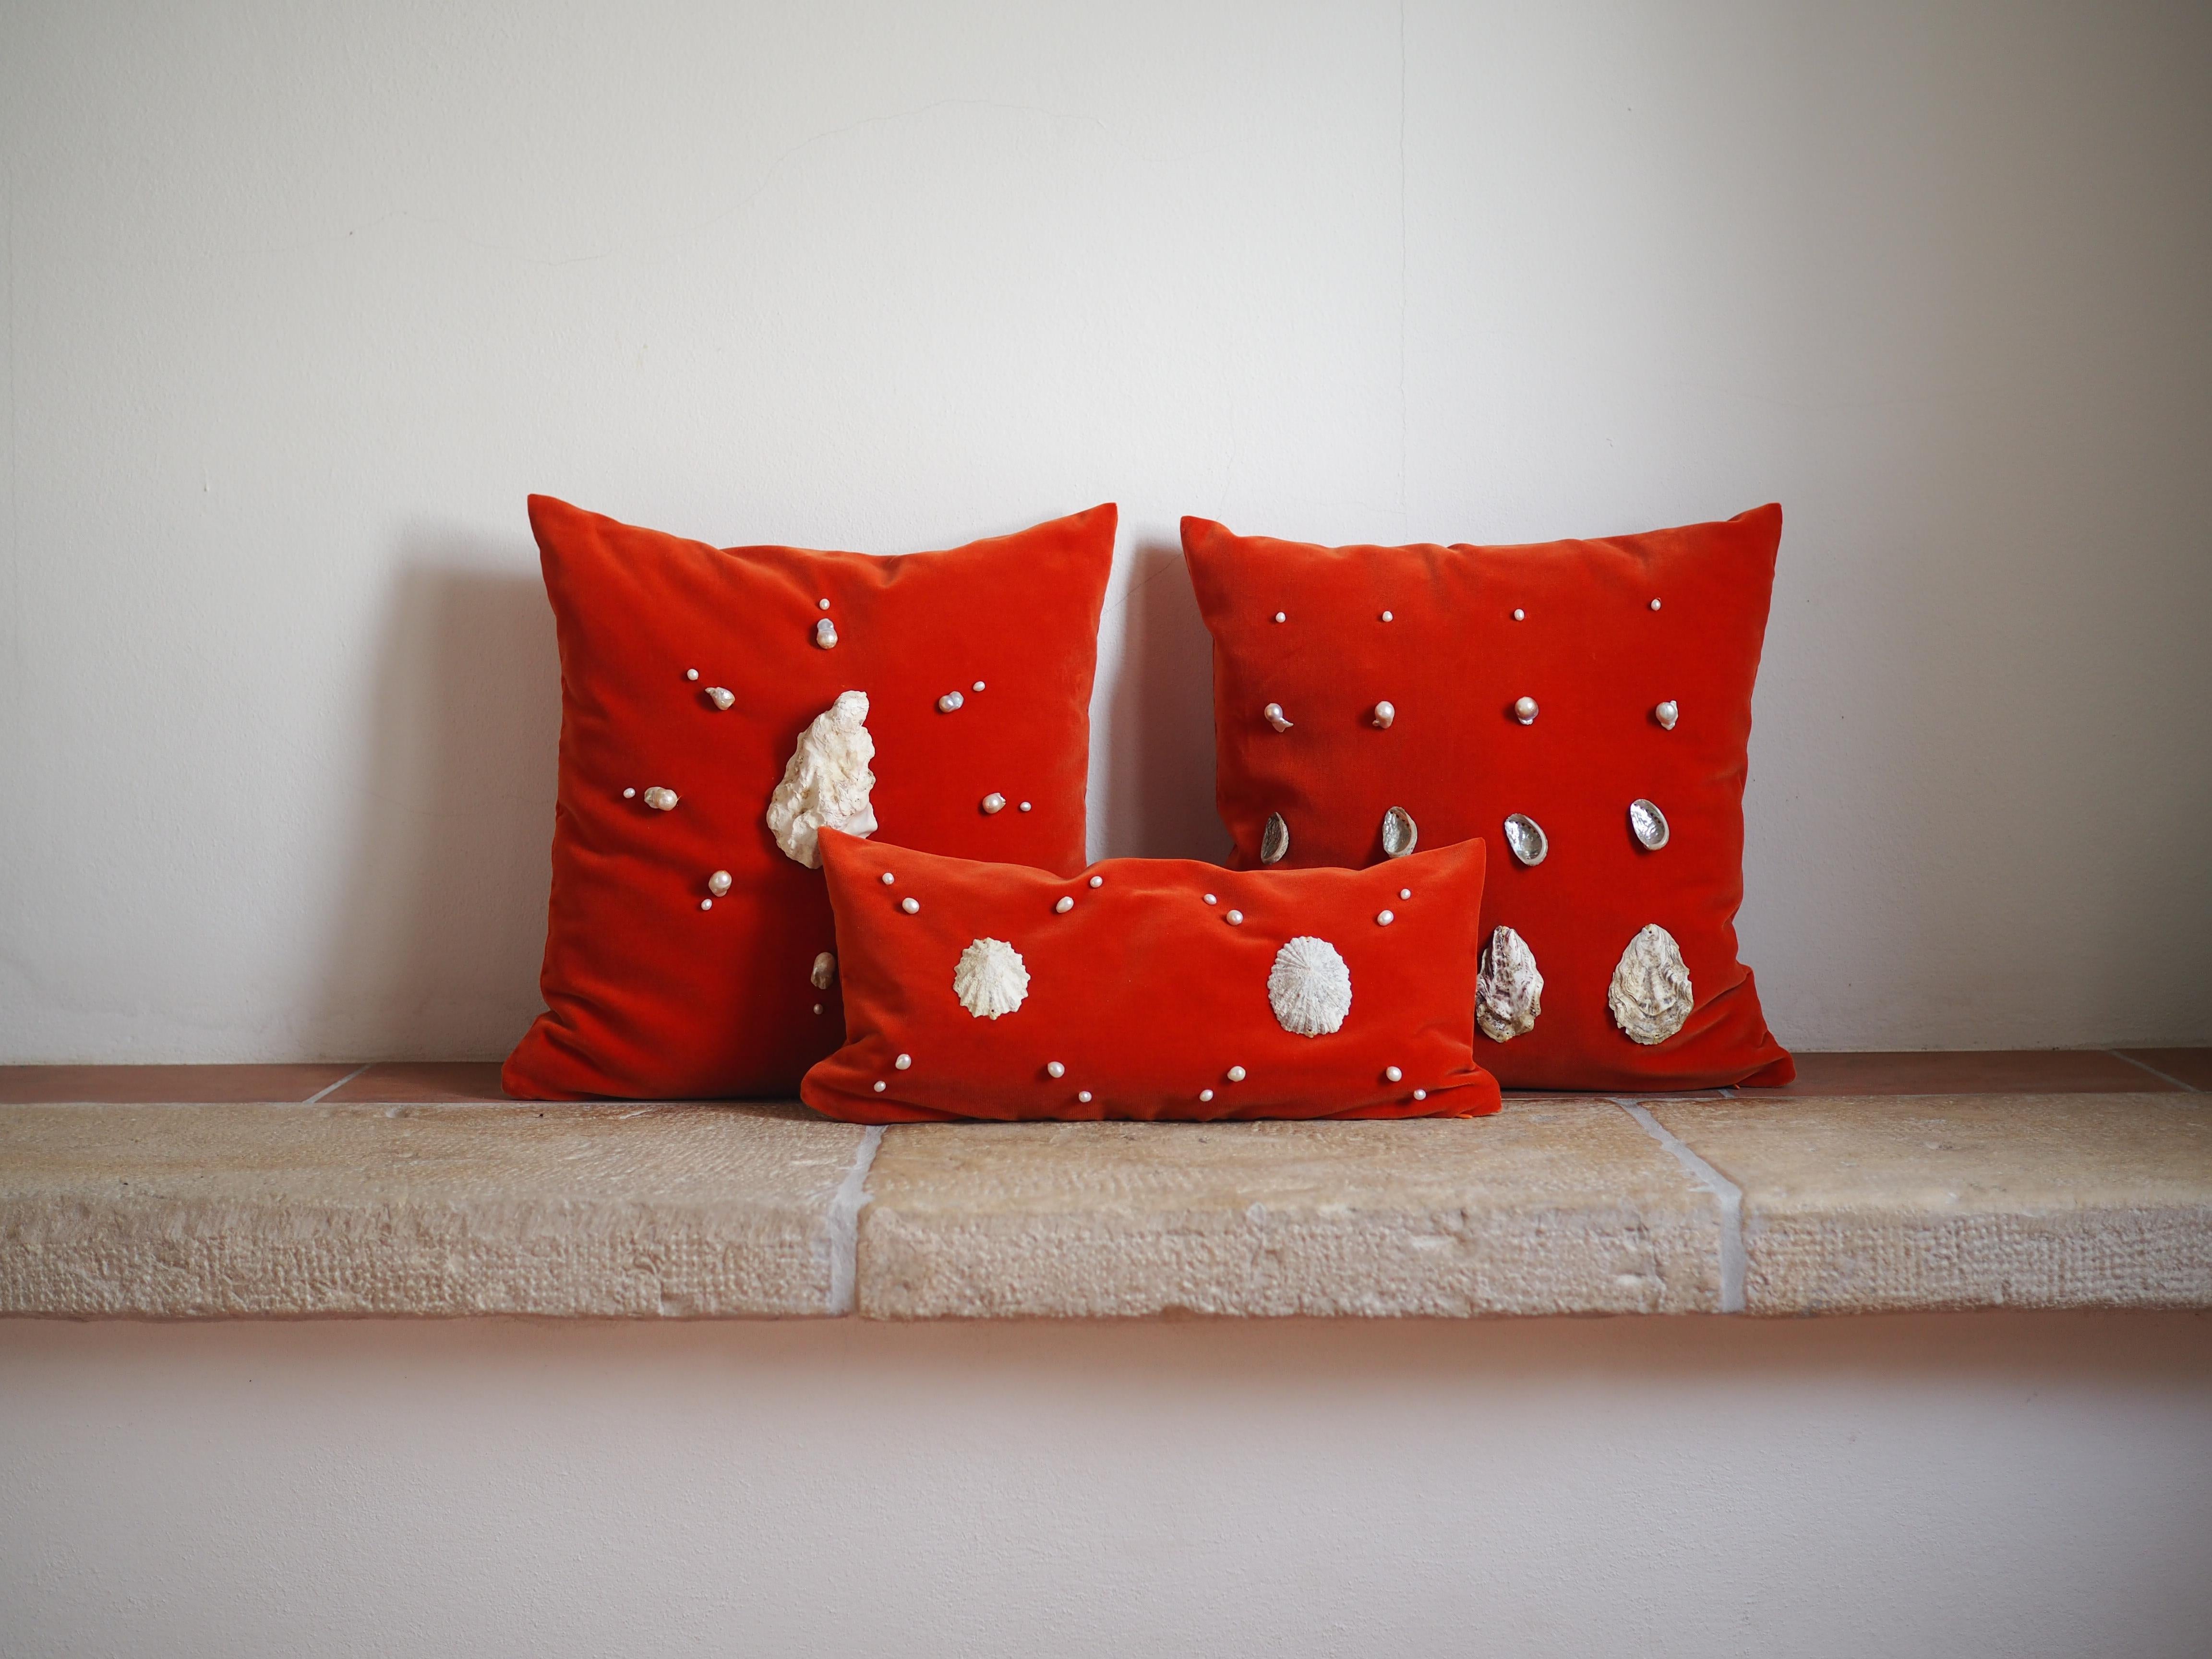 Bon Appetit 006 Decorative Cushion Culto Ponsoda 21st century desingn In New Condition For Sale In POLOP, ES